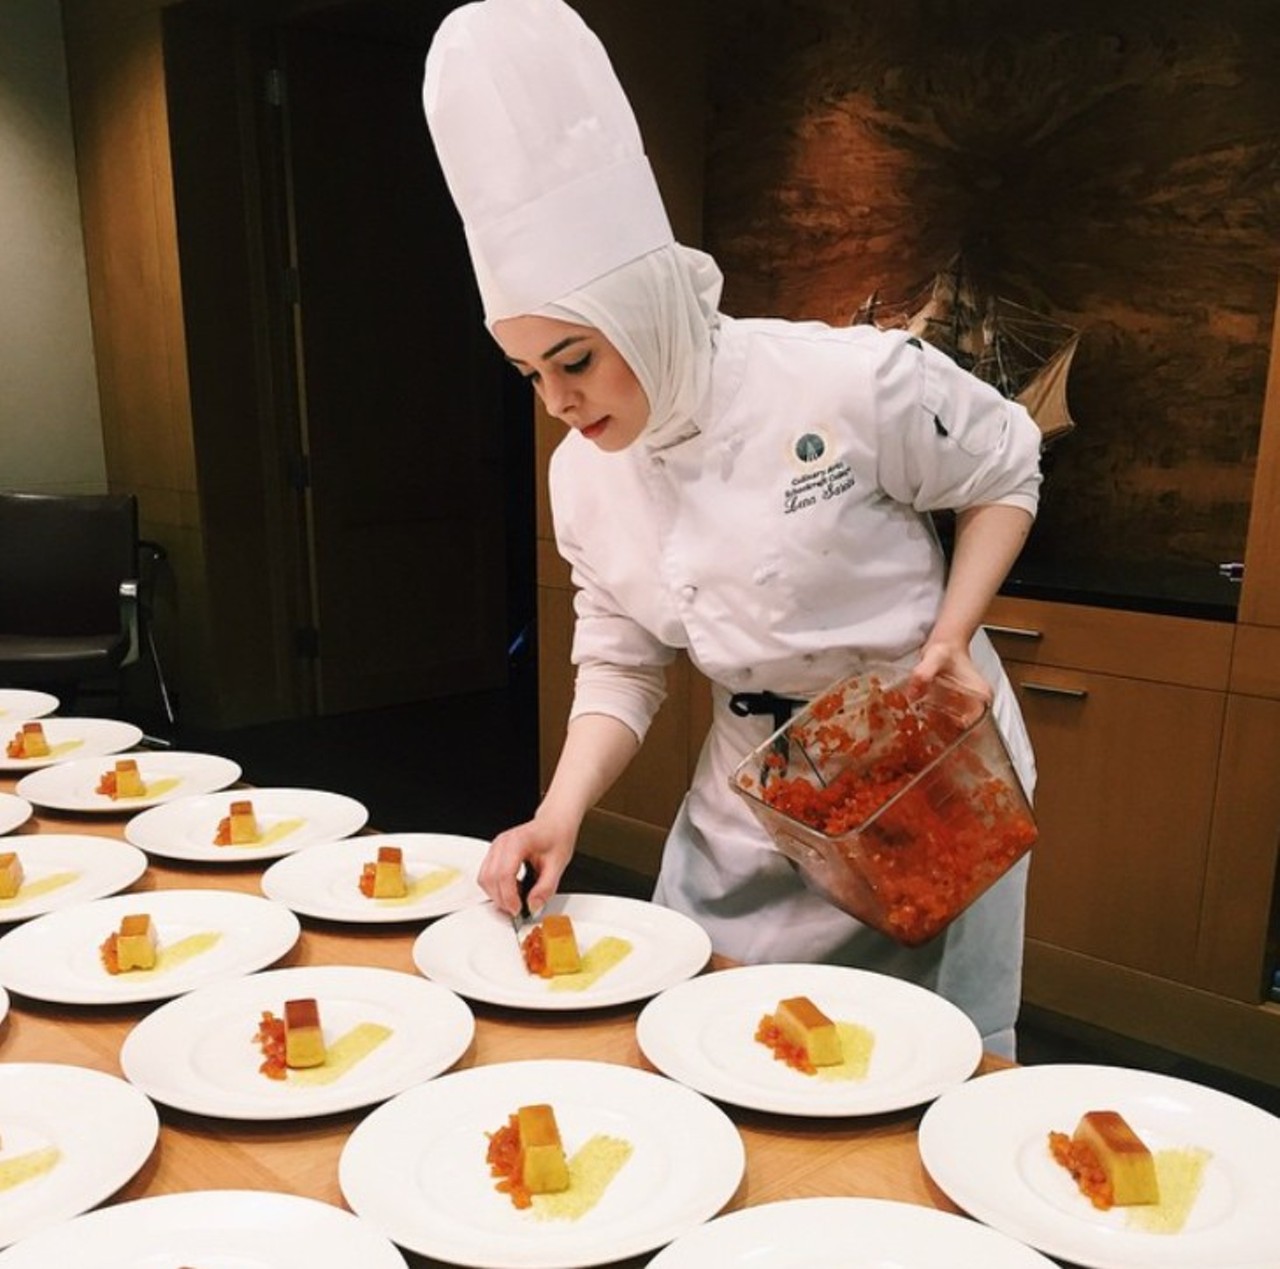 @lenapatissier
3921 2nd Ave, Detroit
As the pastry chef at the Selden Standard in Midtown, Lena Sareini is one of the best in the business and added a James Beard Rising Star award to her growing list of accolades earlier this year.